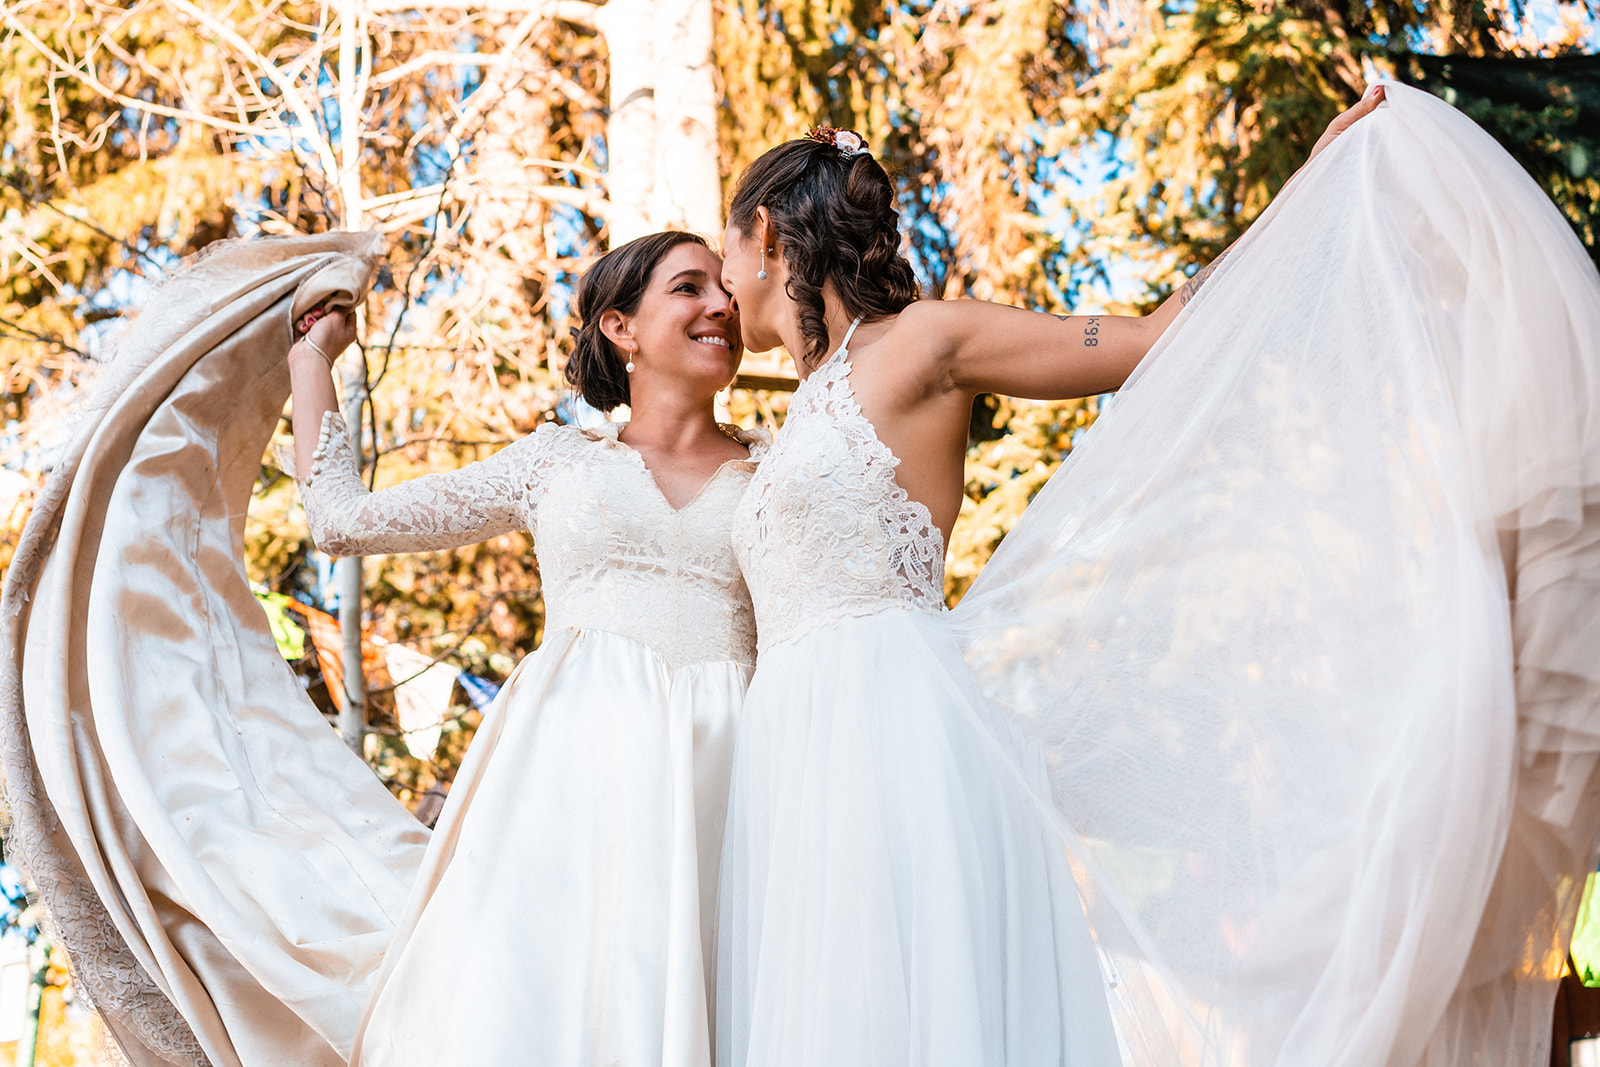 Lesbian brides smiling at one another in white elopement dresses